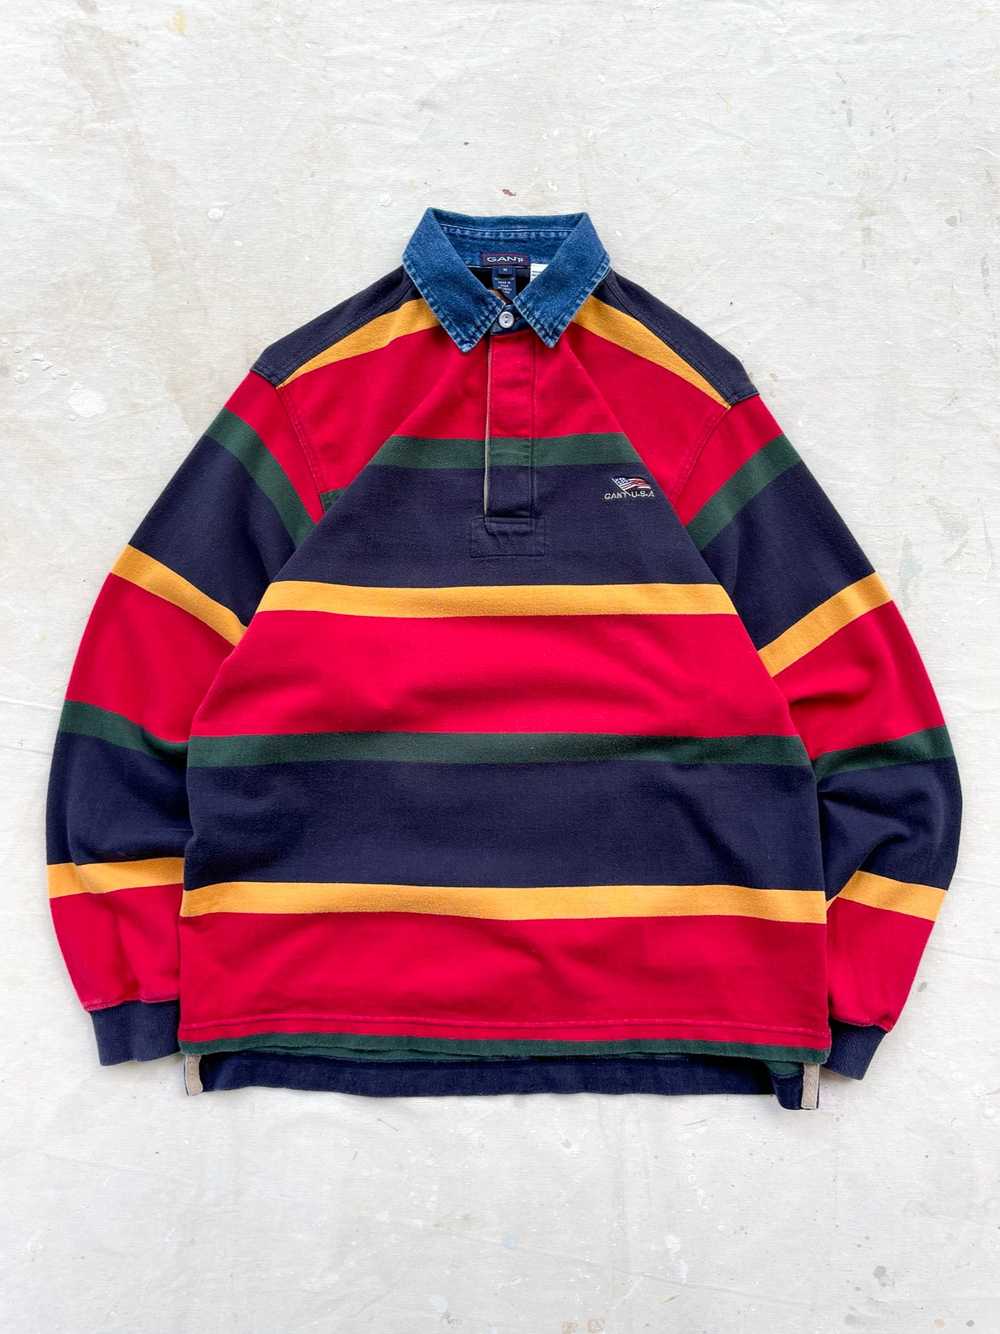 90's Gant Rugby Shirt—[M] - image 1